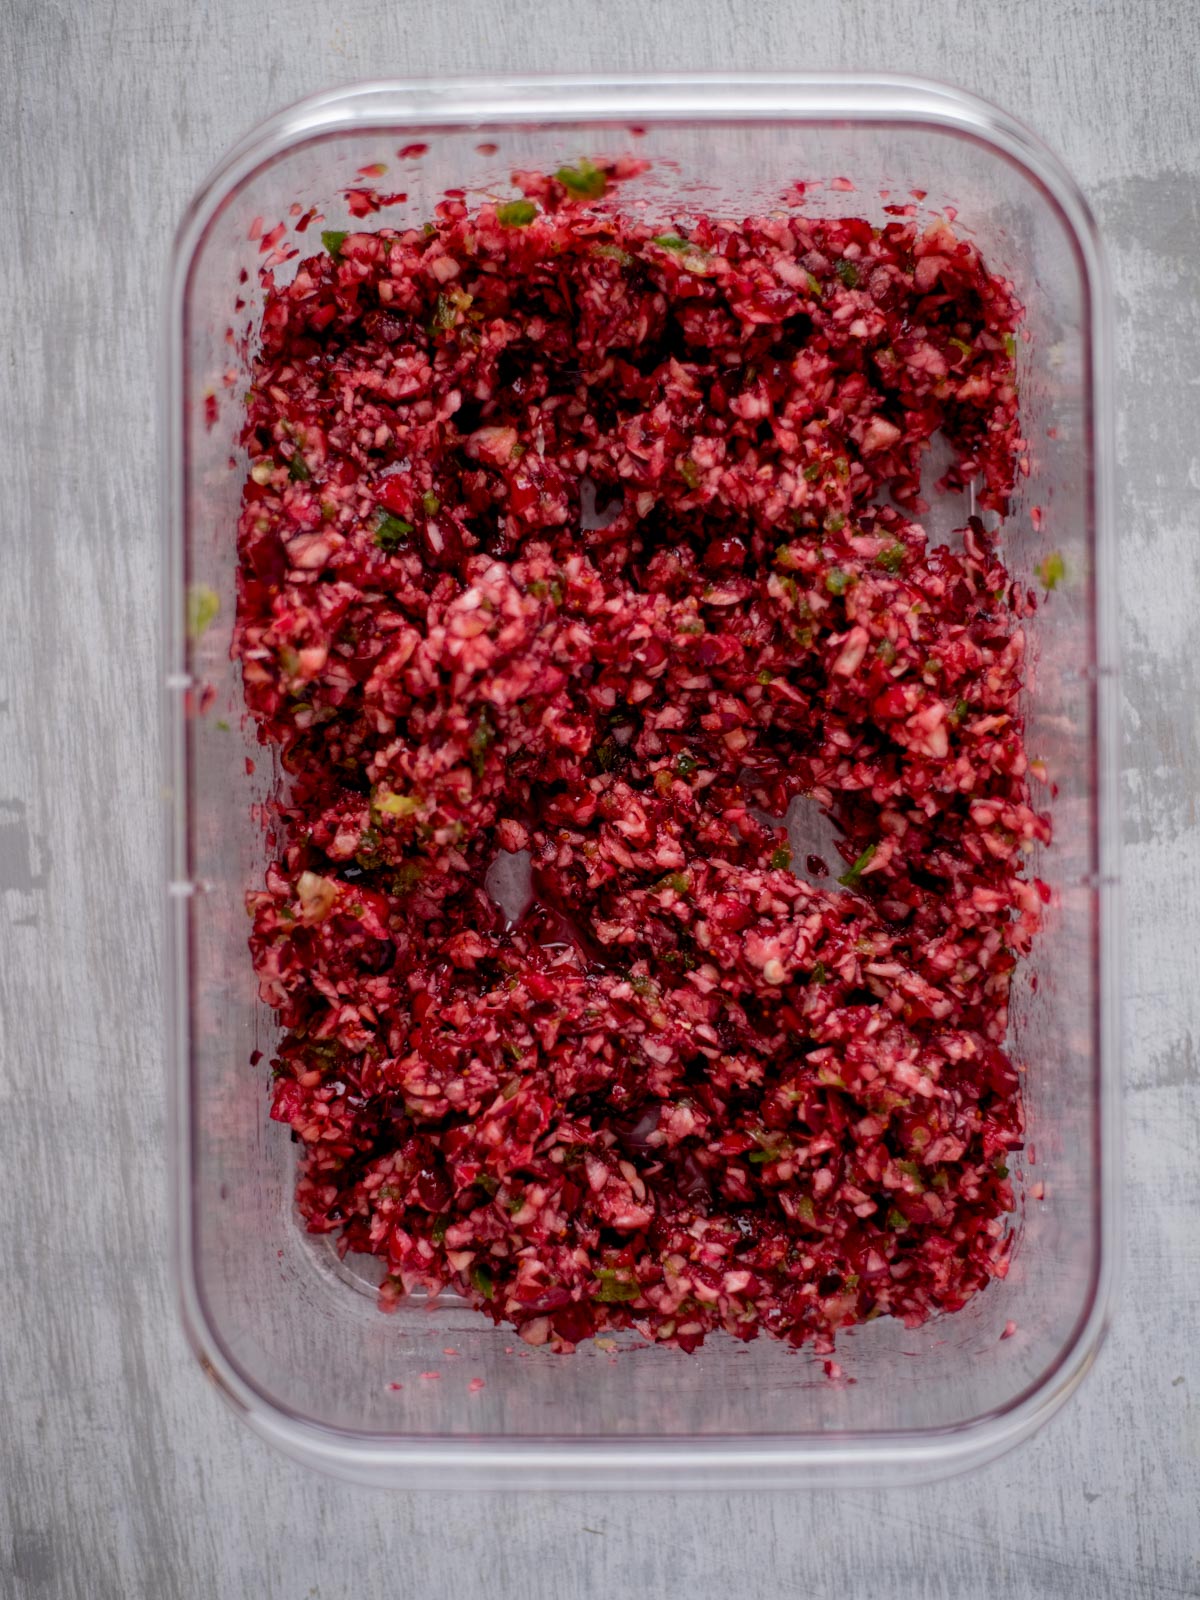 Diced cranberries in a dish.